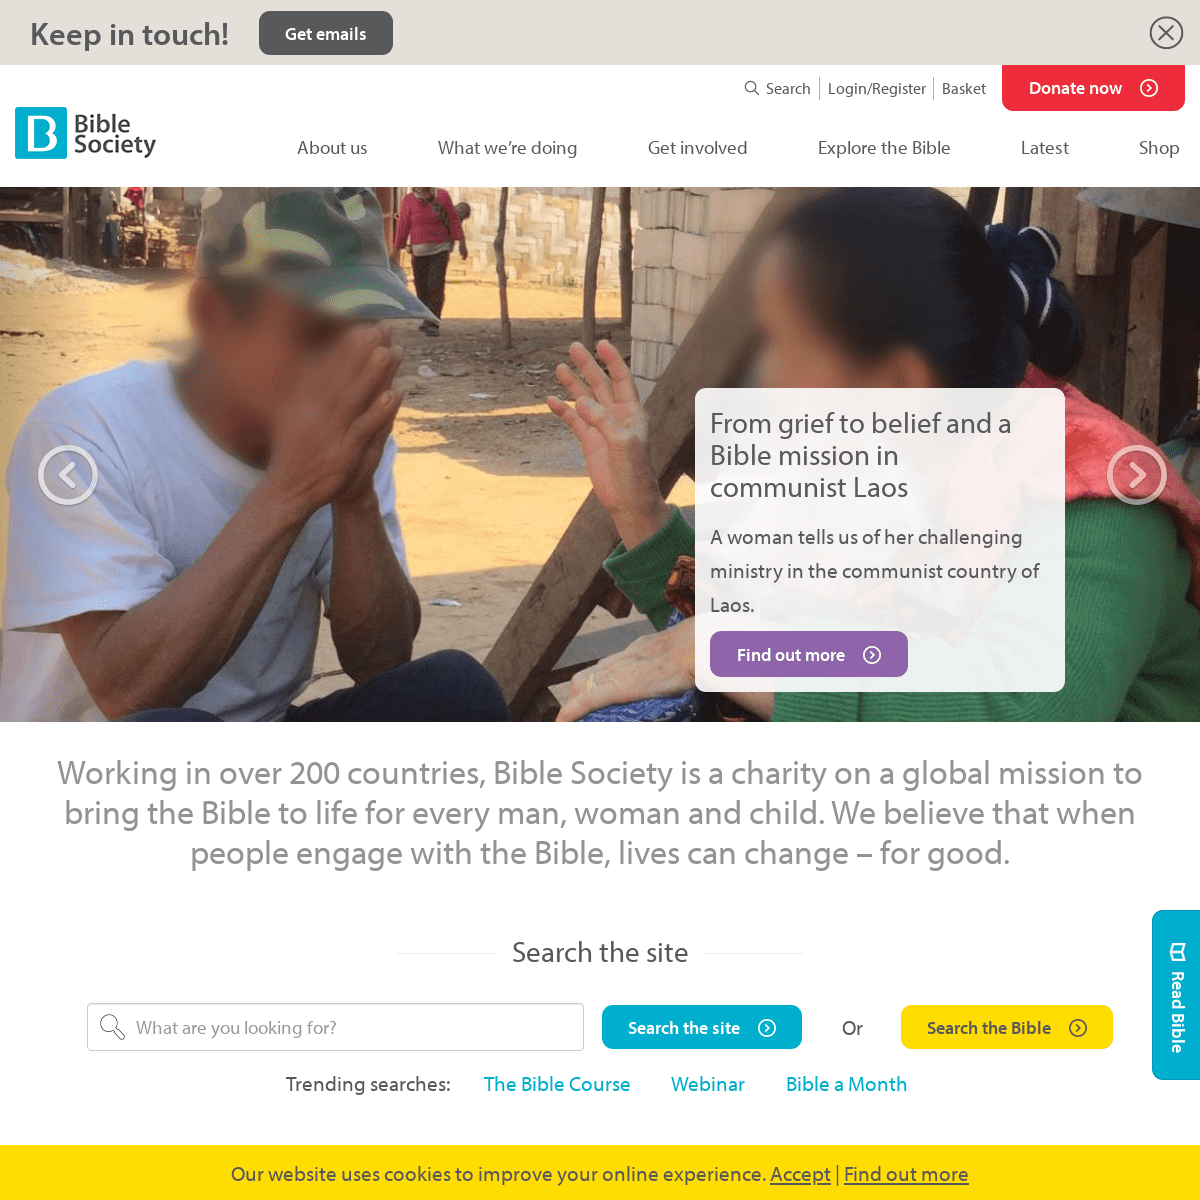 A complete backup of https://biblesociety.org.uk